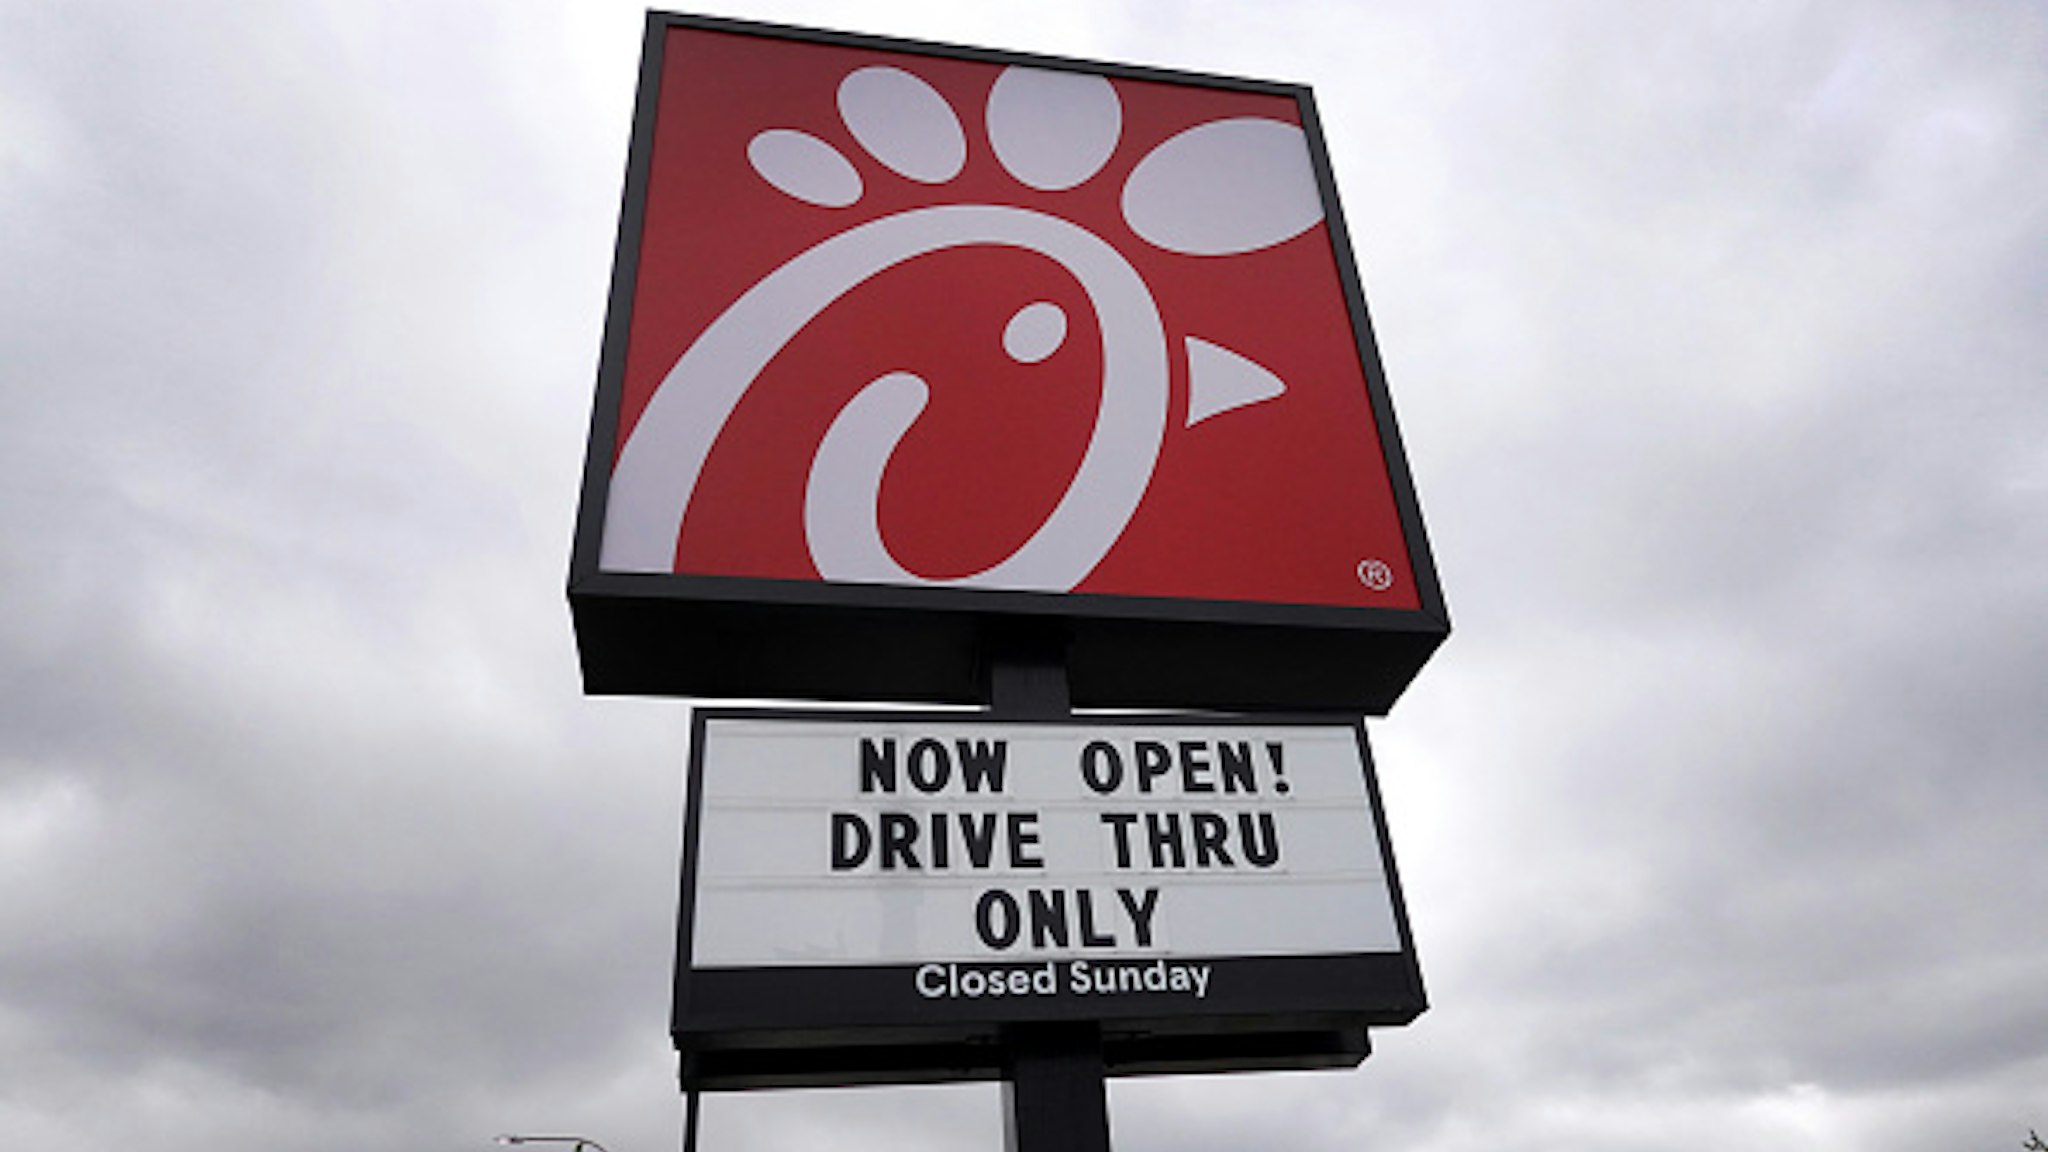 CHICAGO, ILLINOIS - MAY 06: A sign hangs outside of a Chick-fil-A restaurant on May 06, 2021 in Chicago, Illinois. Chicken prices have risen sharply this year as suppliers struggle to keep up with demand, fueled in part, by the popularity of new chicken offerings from fast-food restaurants.